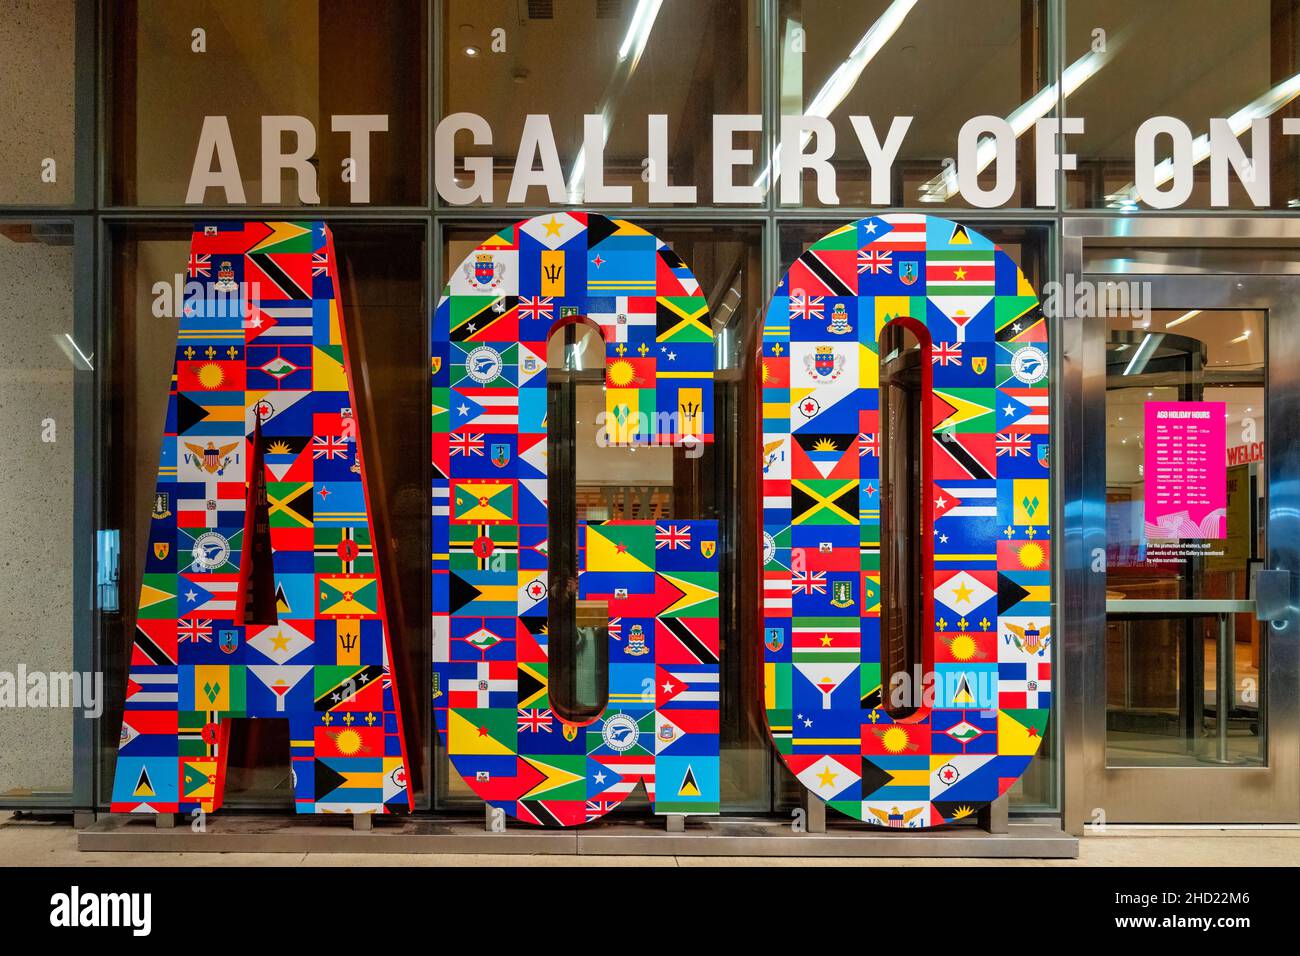 Sign for the Art Gallery of Ontario or AGO. The new design has diverse national flags covering the letters. Jan. 2, 2022 Stock Photo